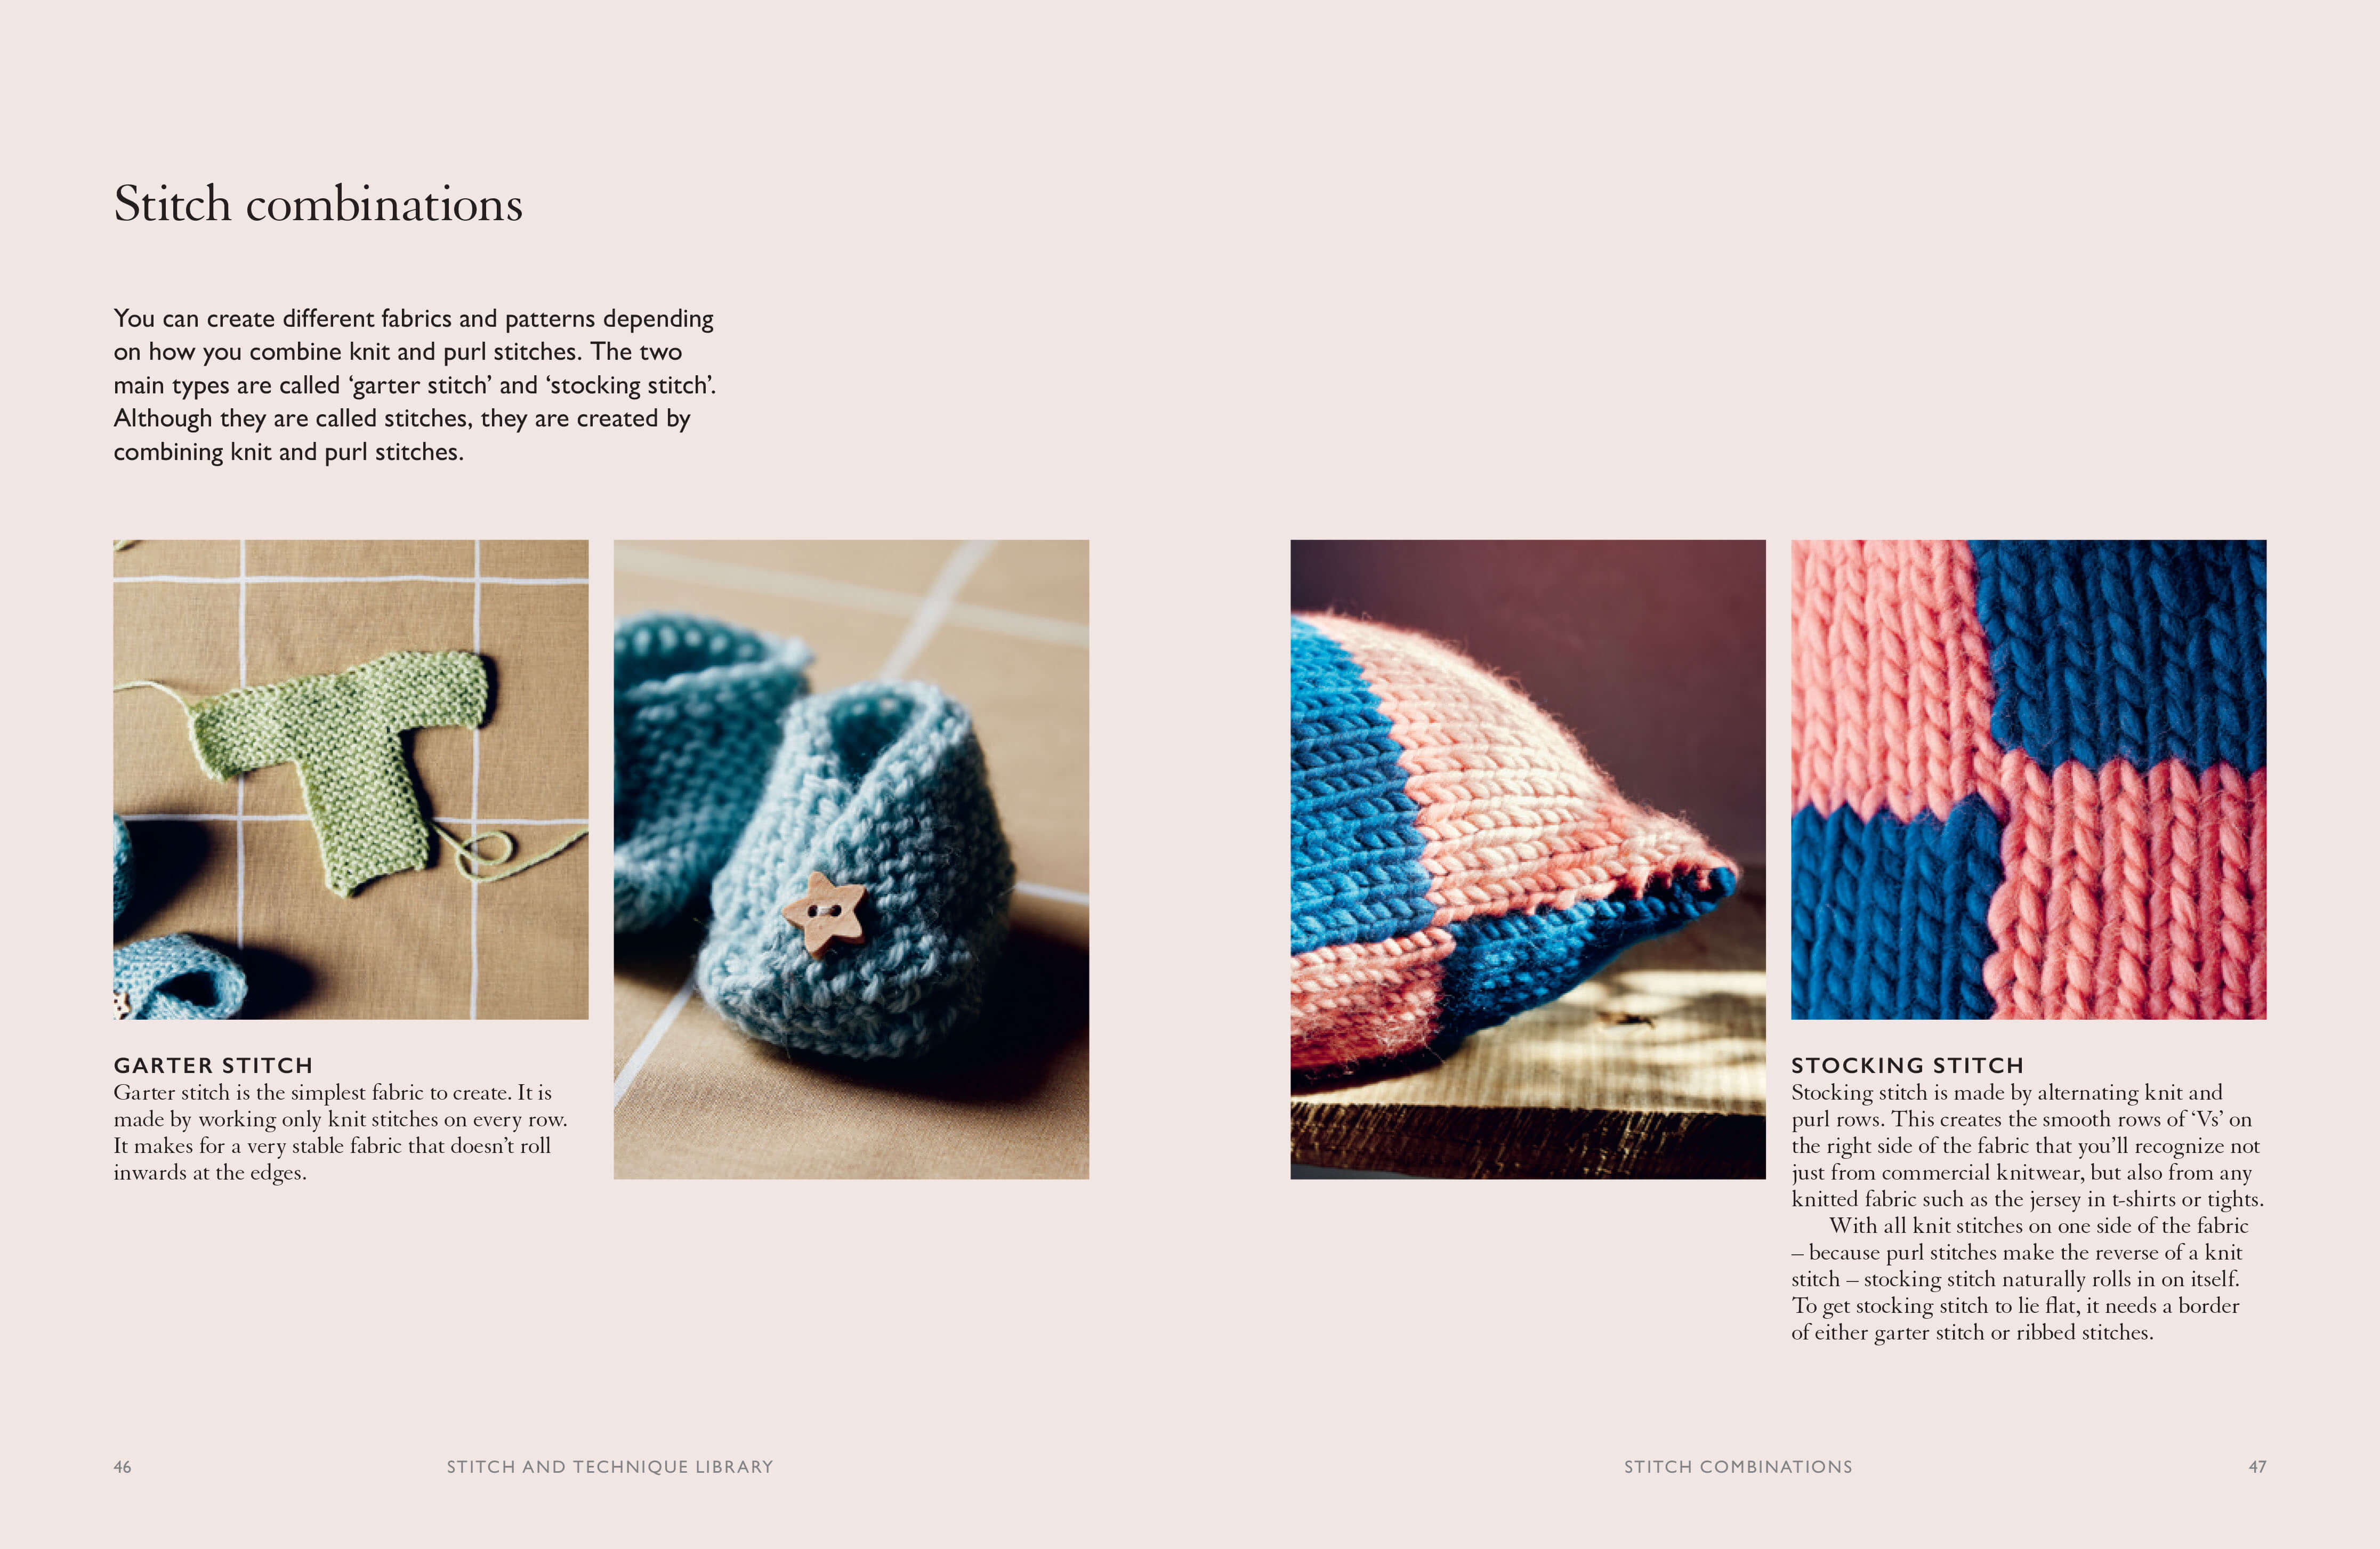 You Will Be Able To Knit By The End Of This Book | Craft Book - Lifestory